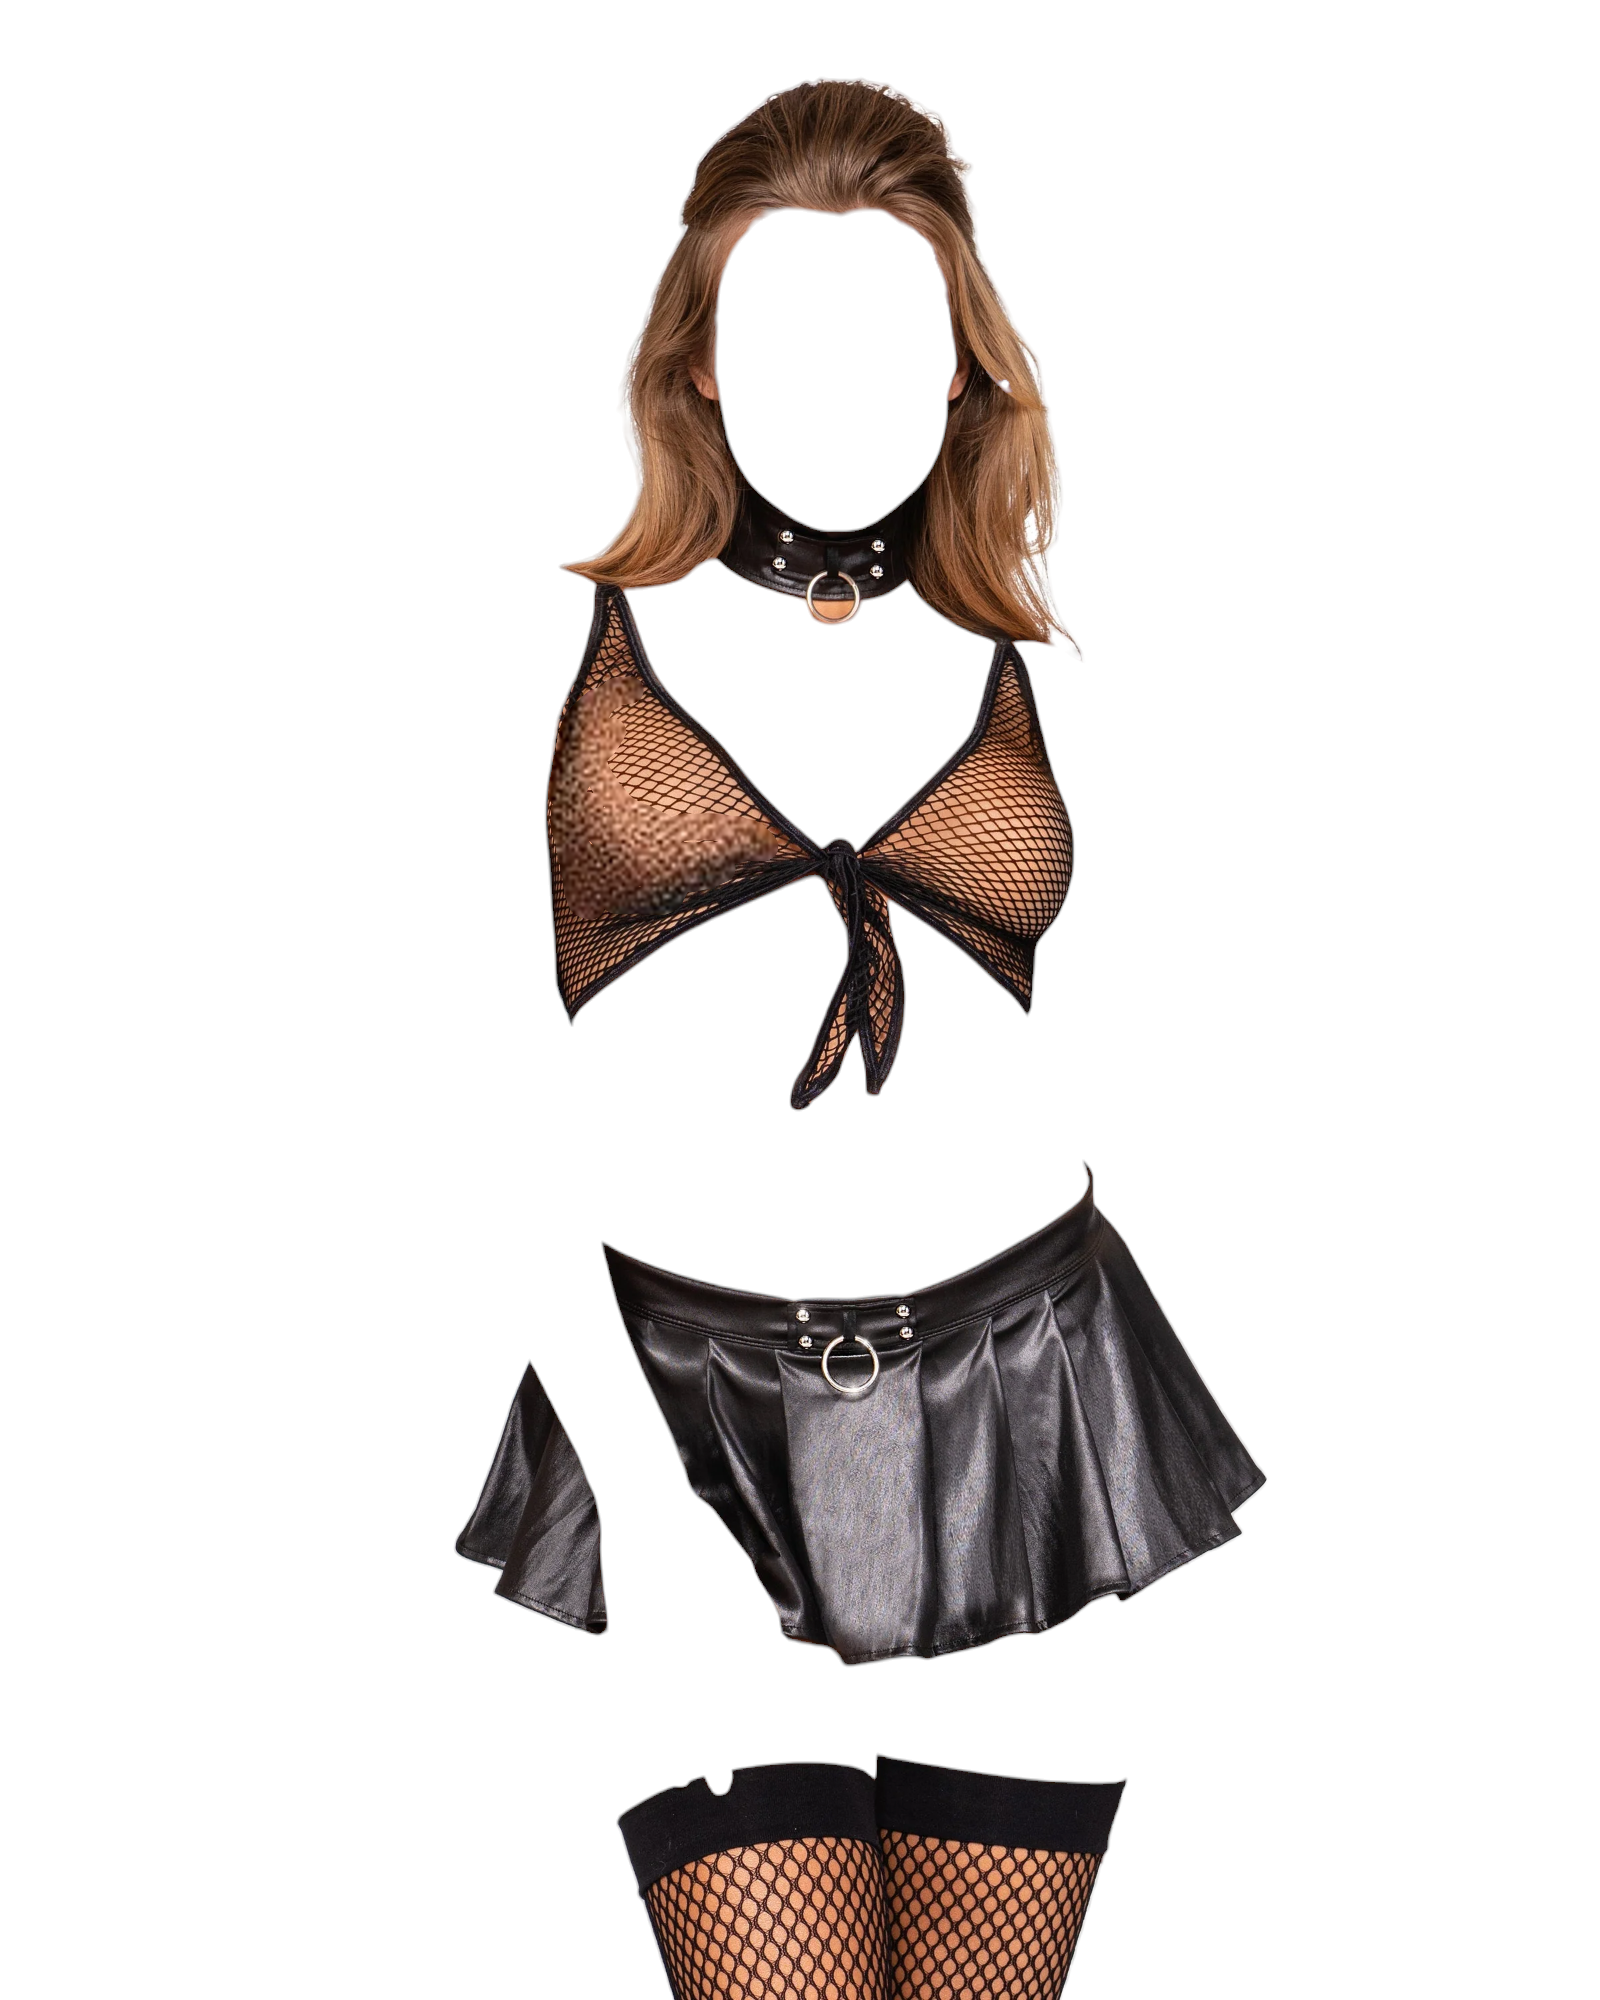 Dreamgirl Goth Schoolgirl Strappy Bralette with Skirt & G-String Costume Set Black One Size